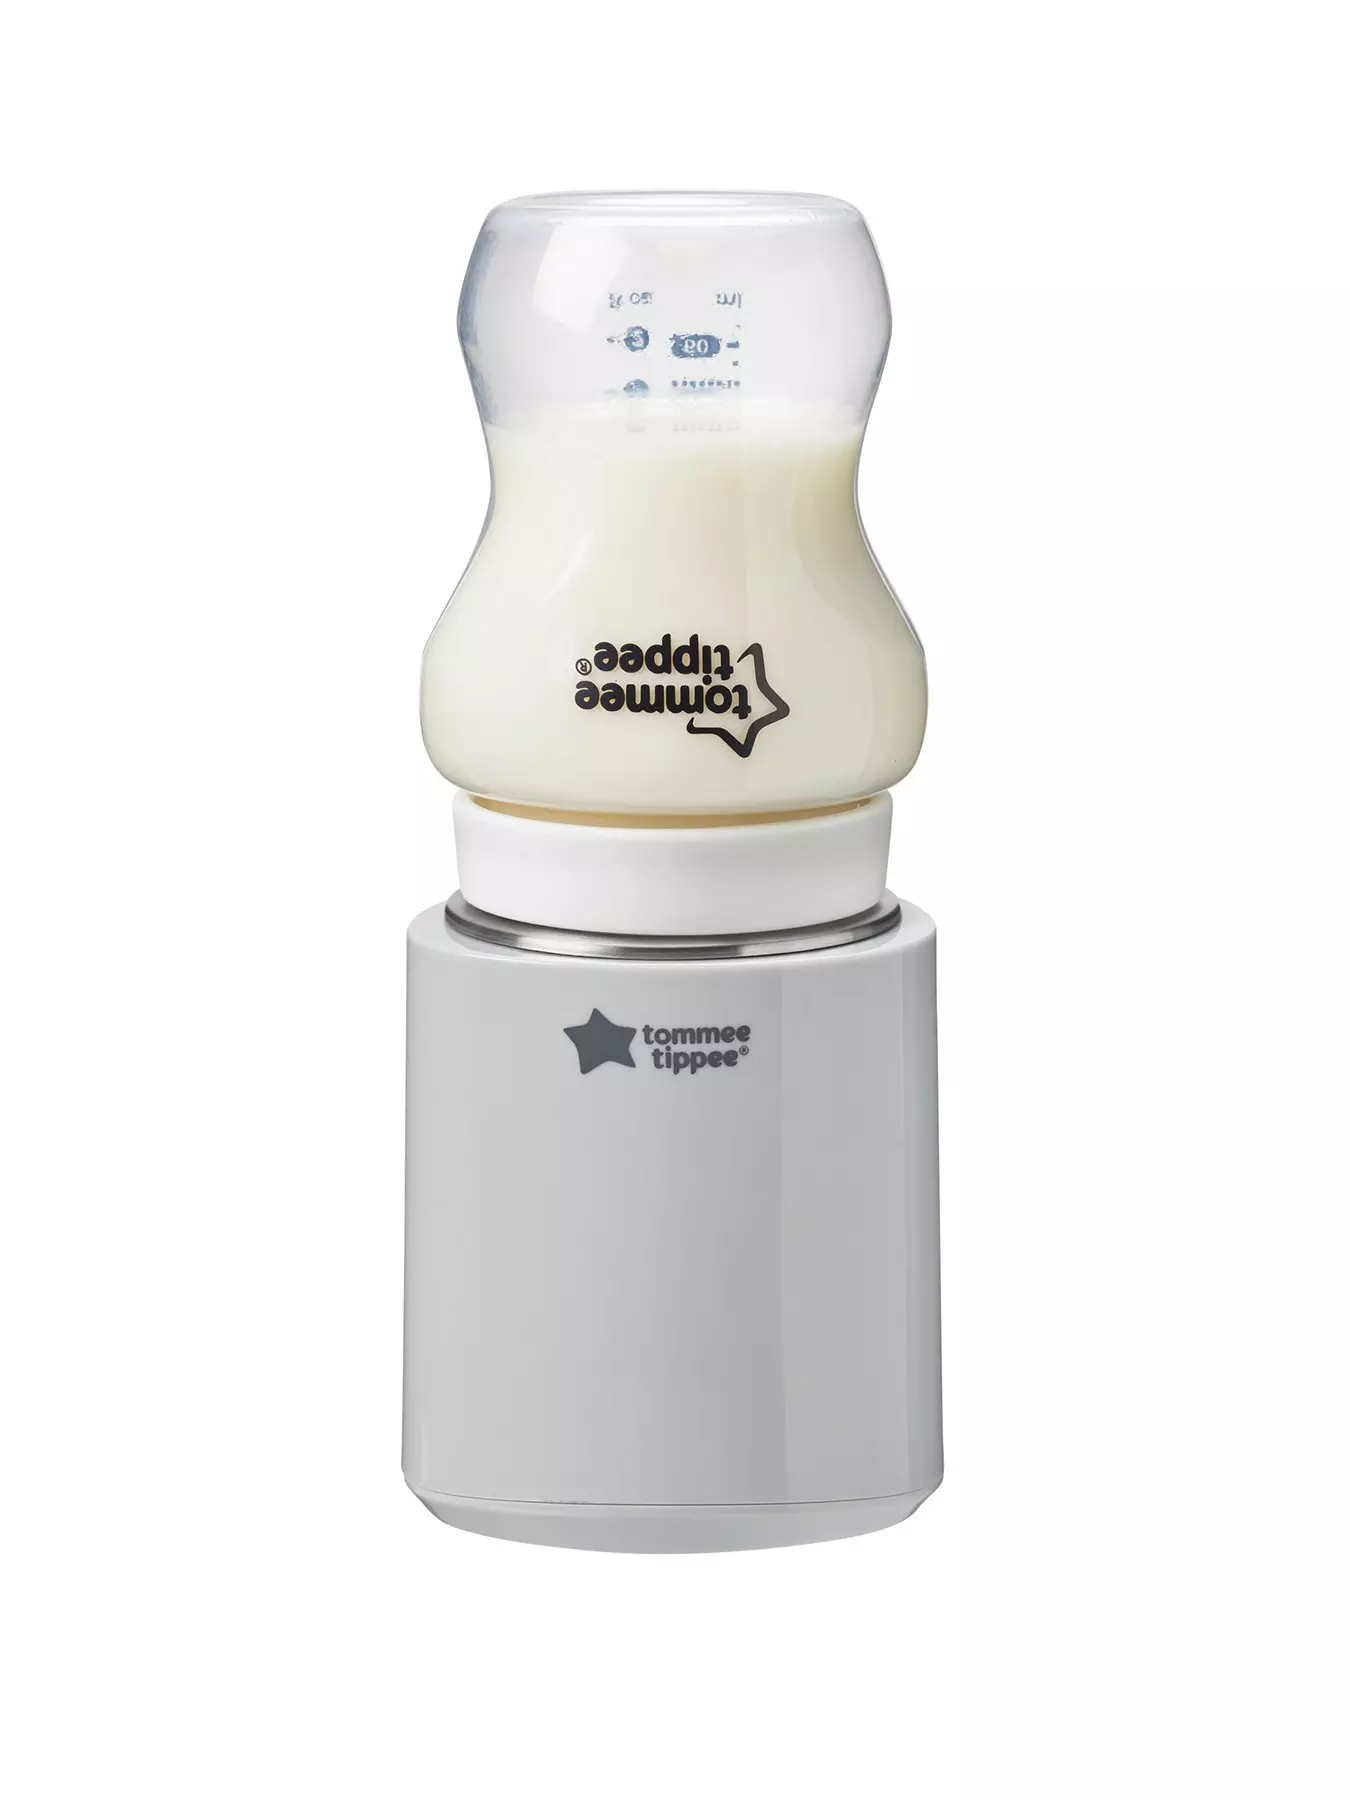 Tommee tippee, Brand store